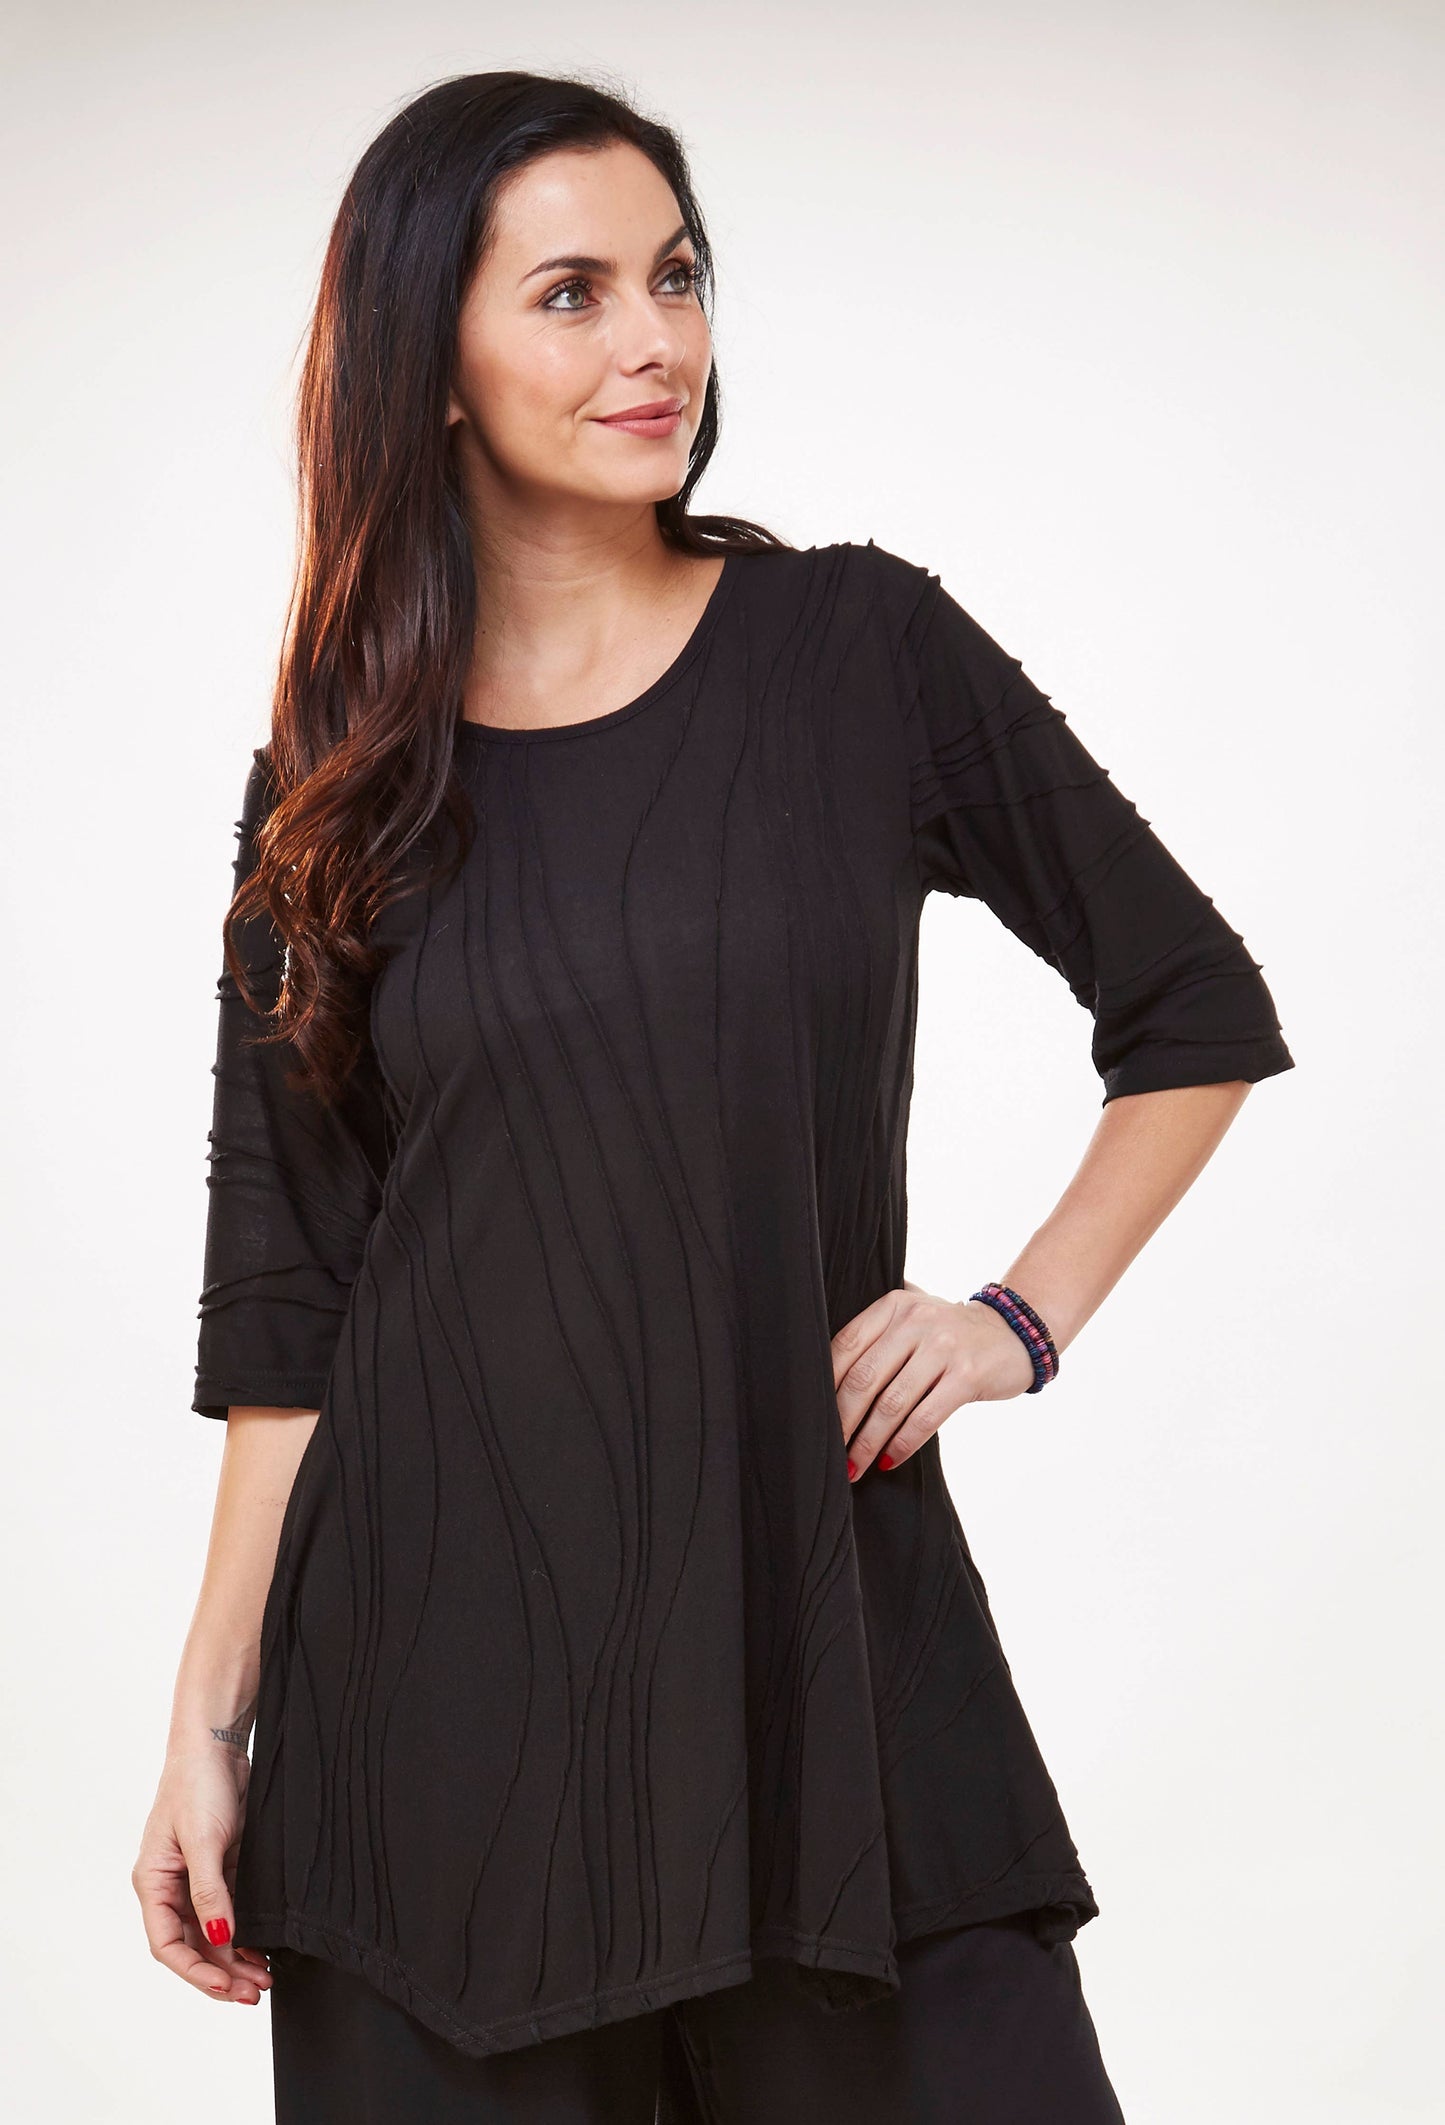 Windhorse Trading Inc - Stitched Spring Cotton Tunic. WN1515